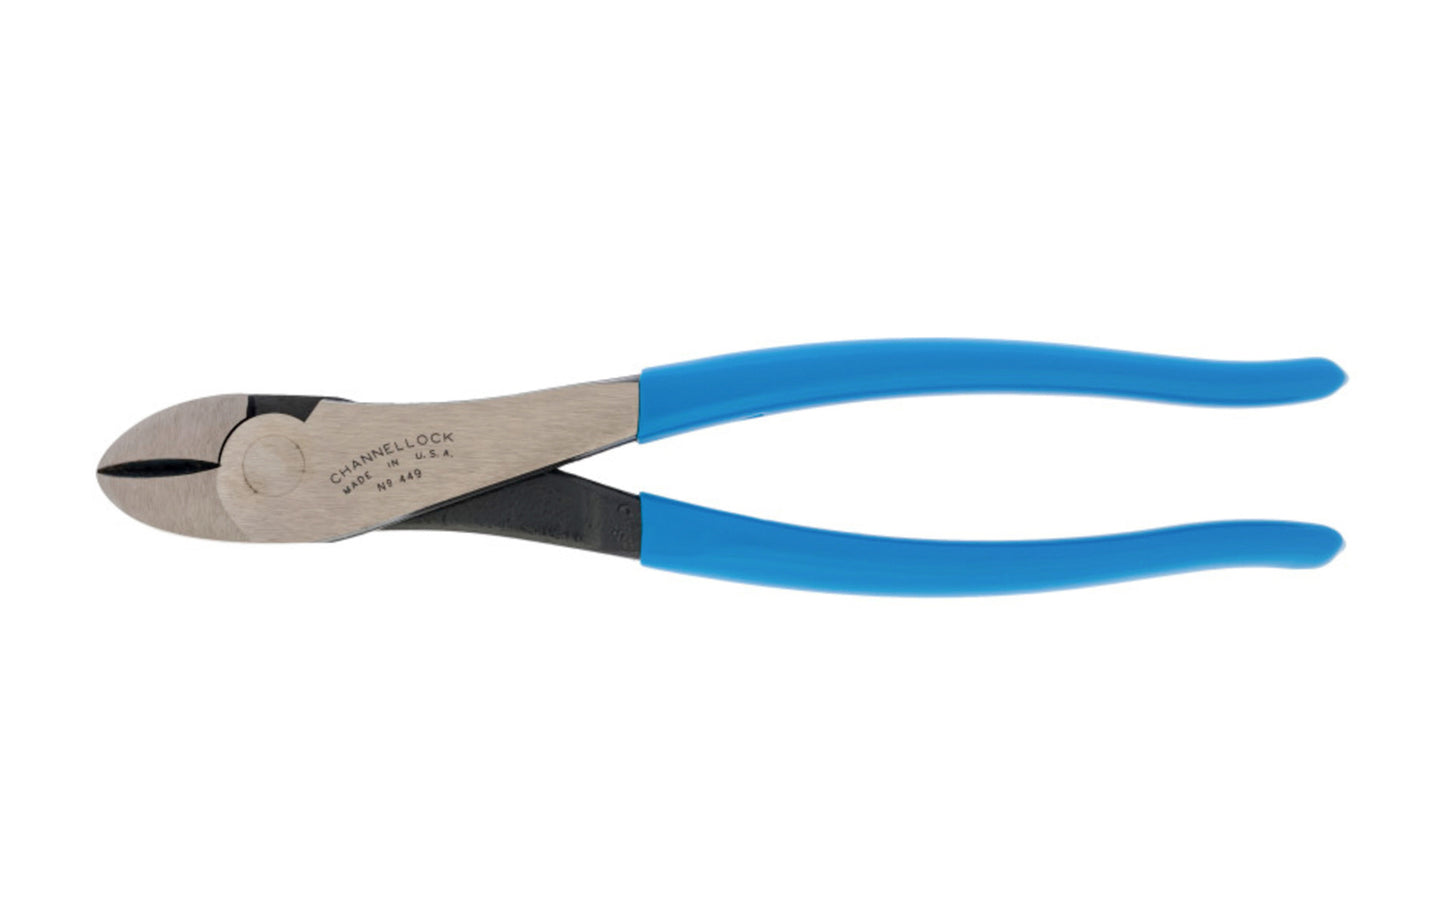 Channellock High Leverage 9-1/2" Curved Diagonal Cutting Pliers. Model No. 449. Quality high carbon alloy U.S. steel for superior performance. Laser heat-treated cutting edges last longer. Cuts piano, hard, medium hard, & soft wire. Vinyl blue comfort grips. 025582825018. Made in USA. 